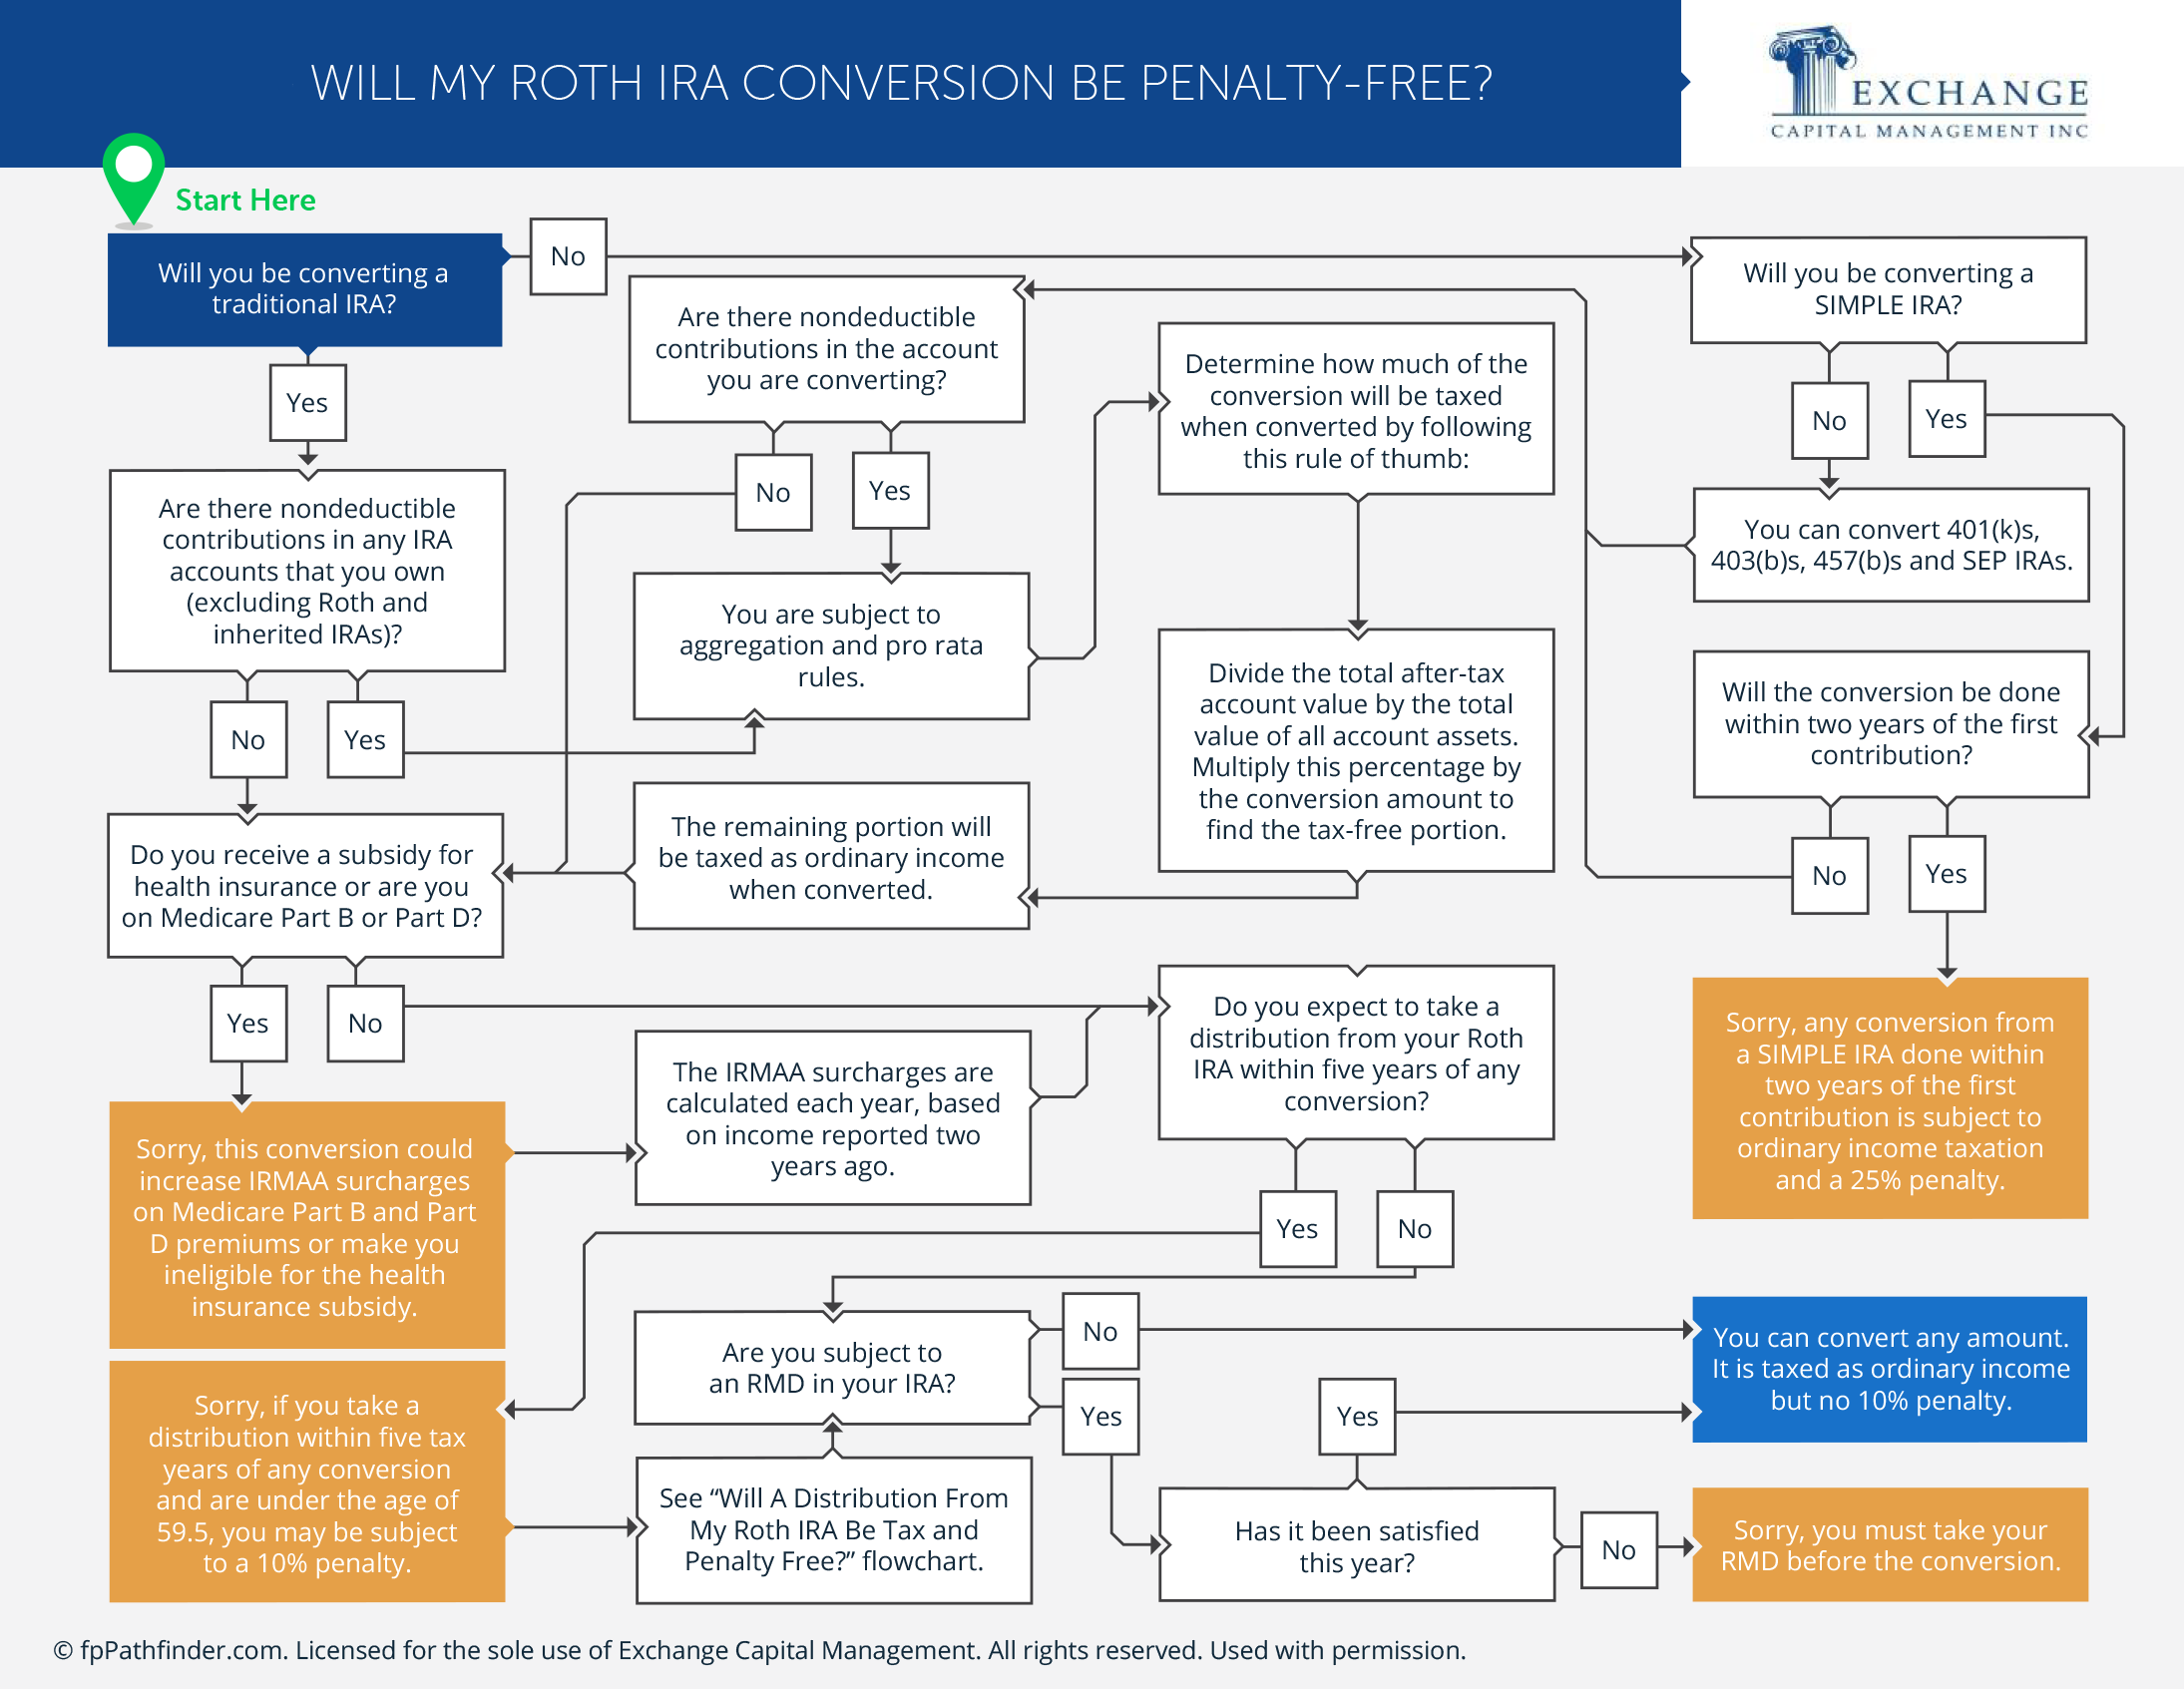 Will My Roth IRA Conversion Be Penalty-Free?